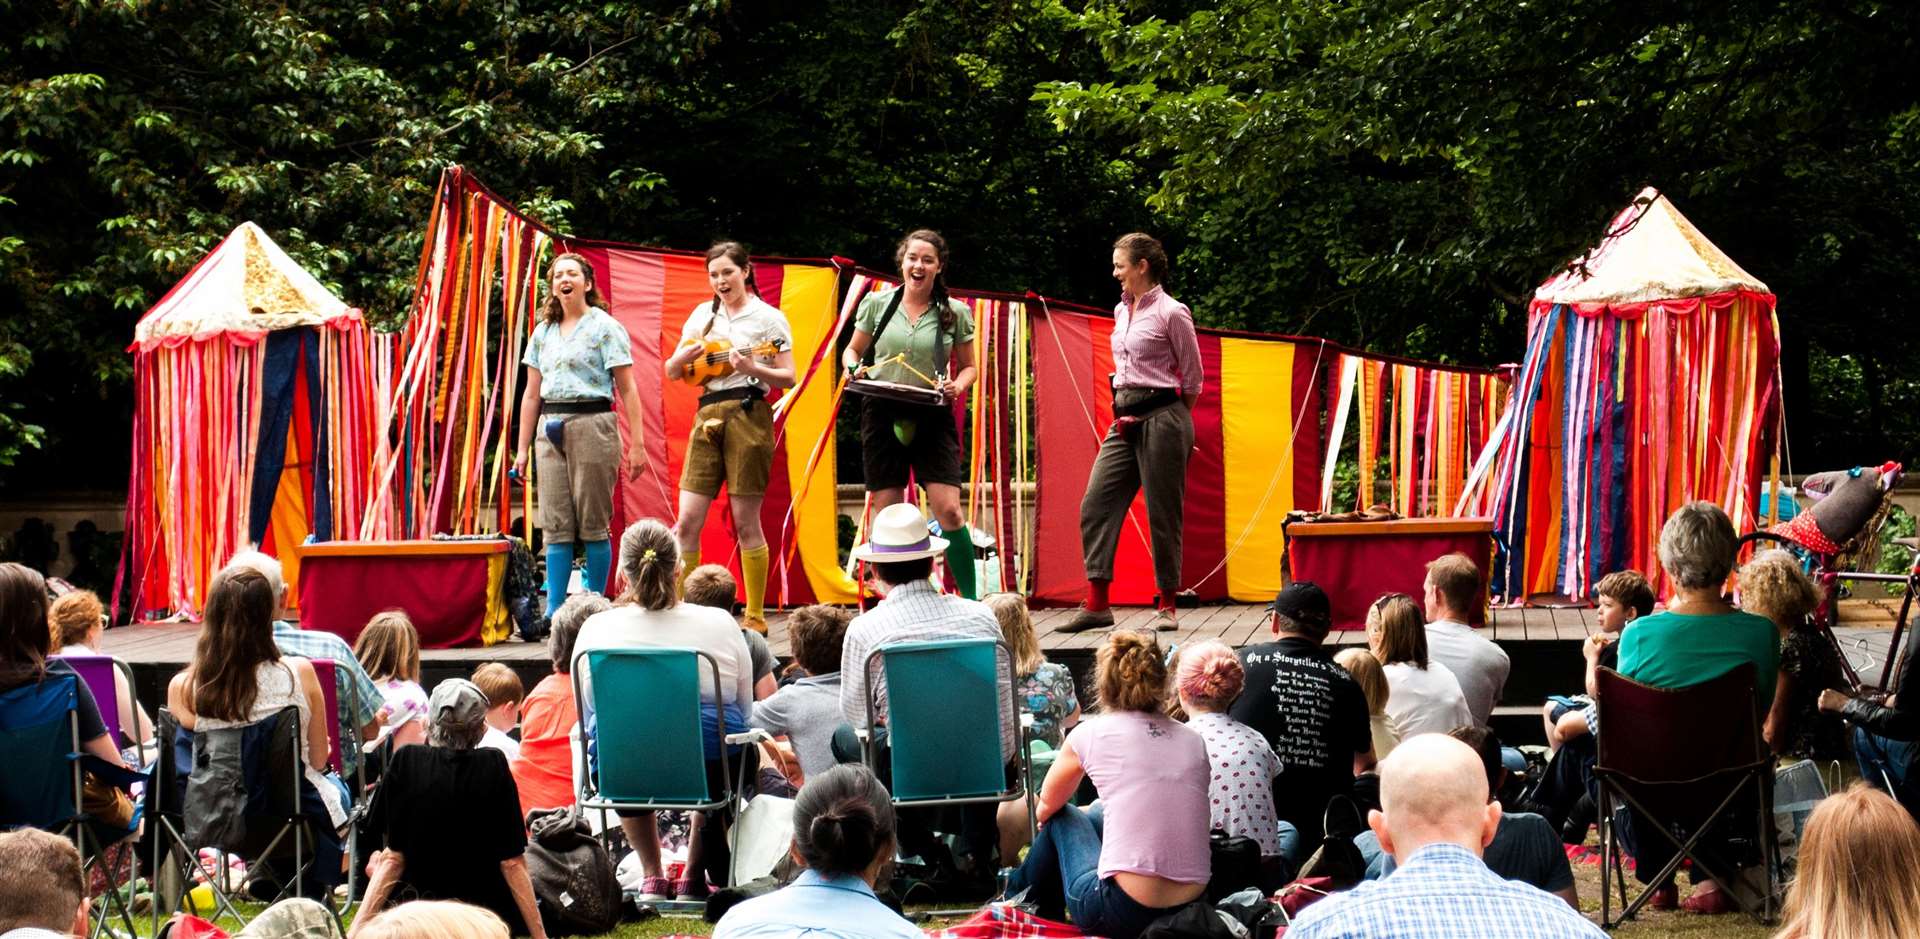 Bicycle pedalling Shakespearian actors Handlebards return to the stage this summer